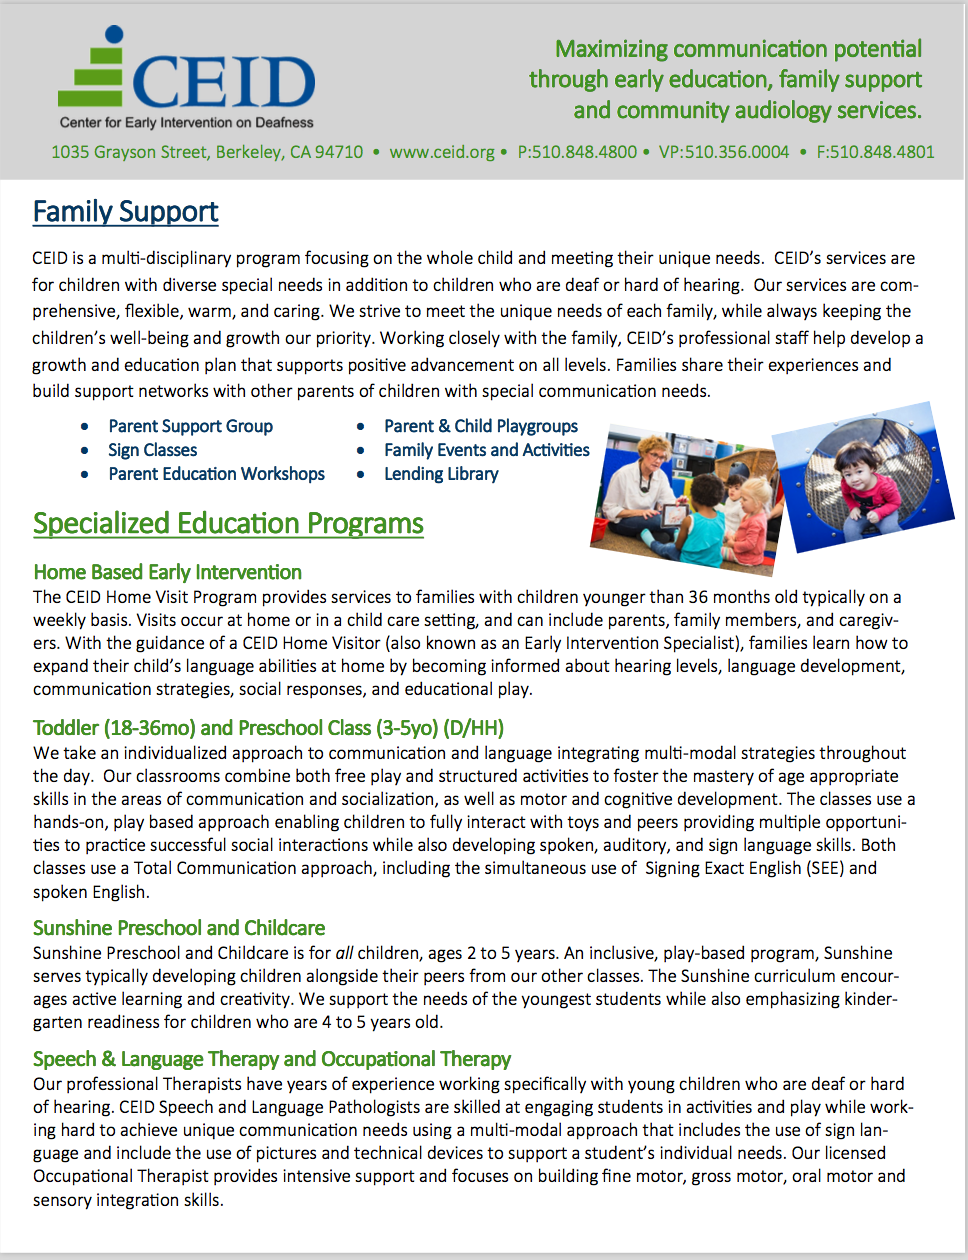 Maximizing Communication Potential Through Early Education, Family Support, and Community Services